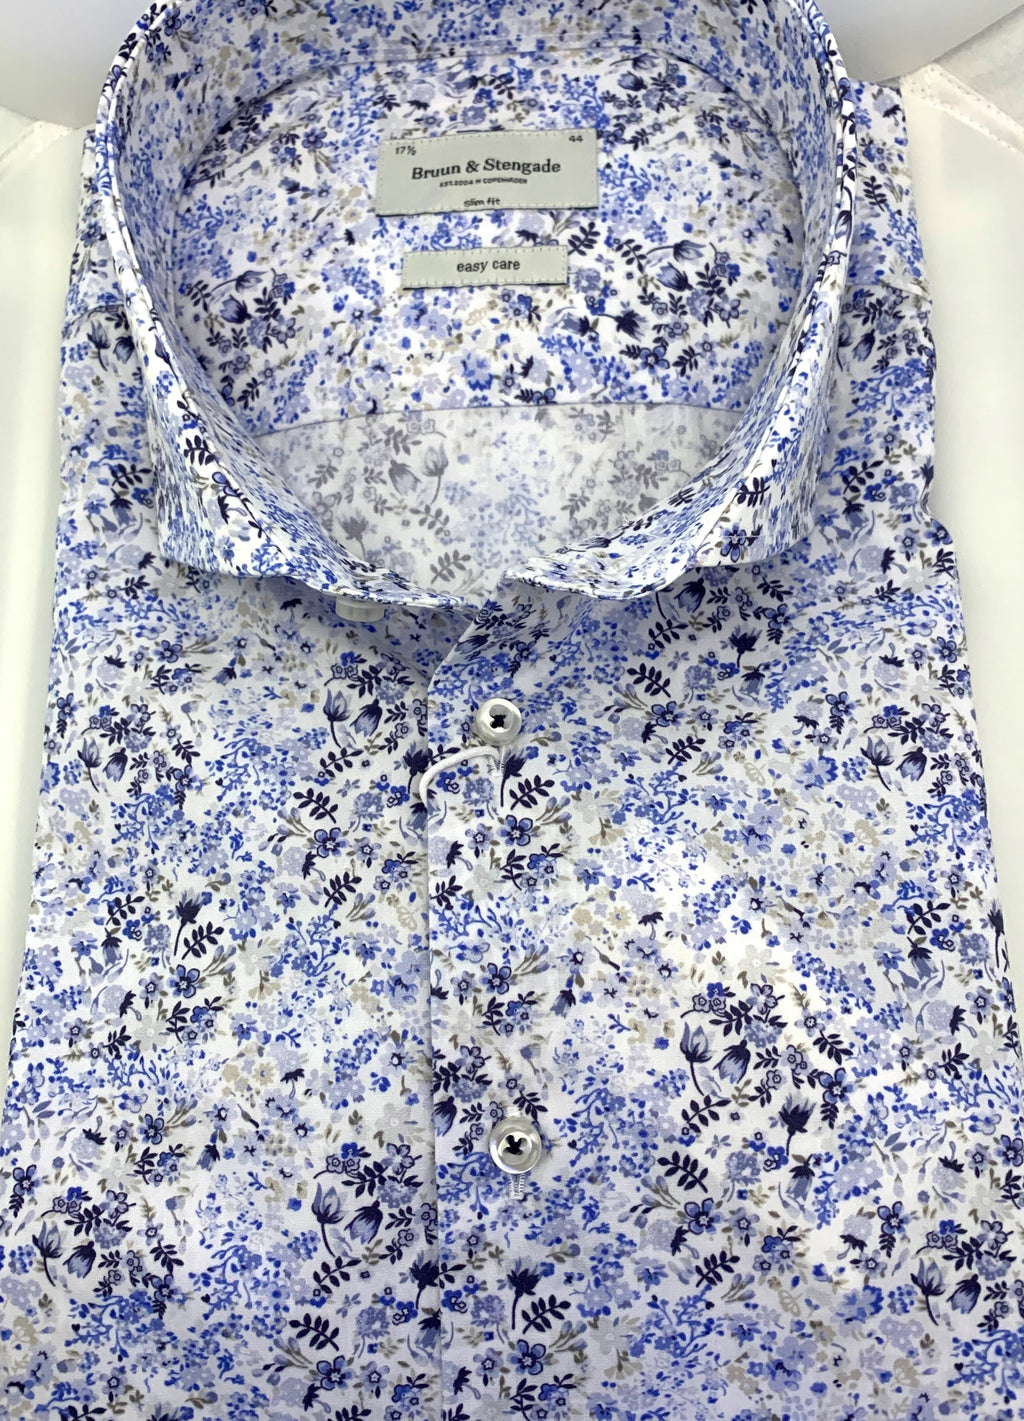 Bruun & Stengade Shades of Blue and Grey Floral Sport Shirt